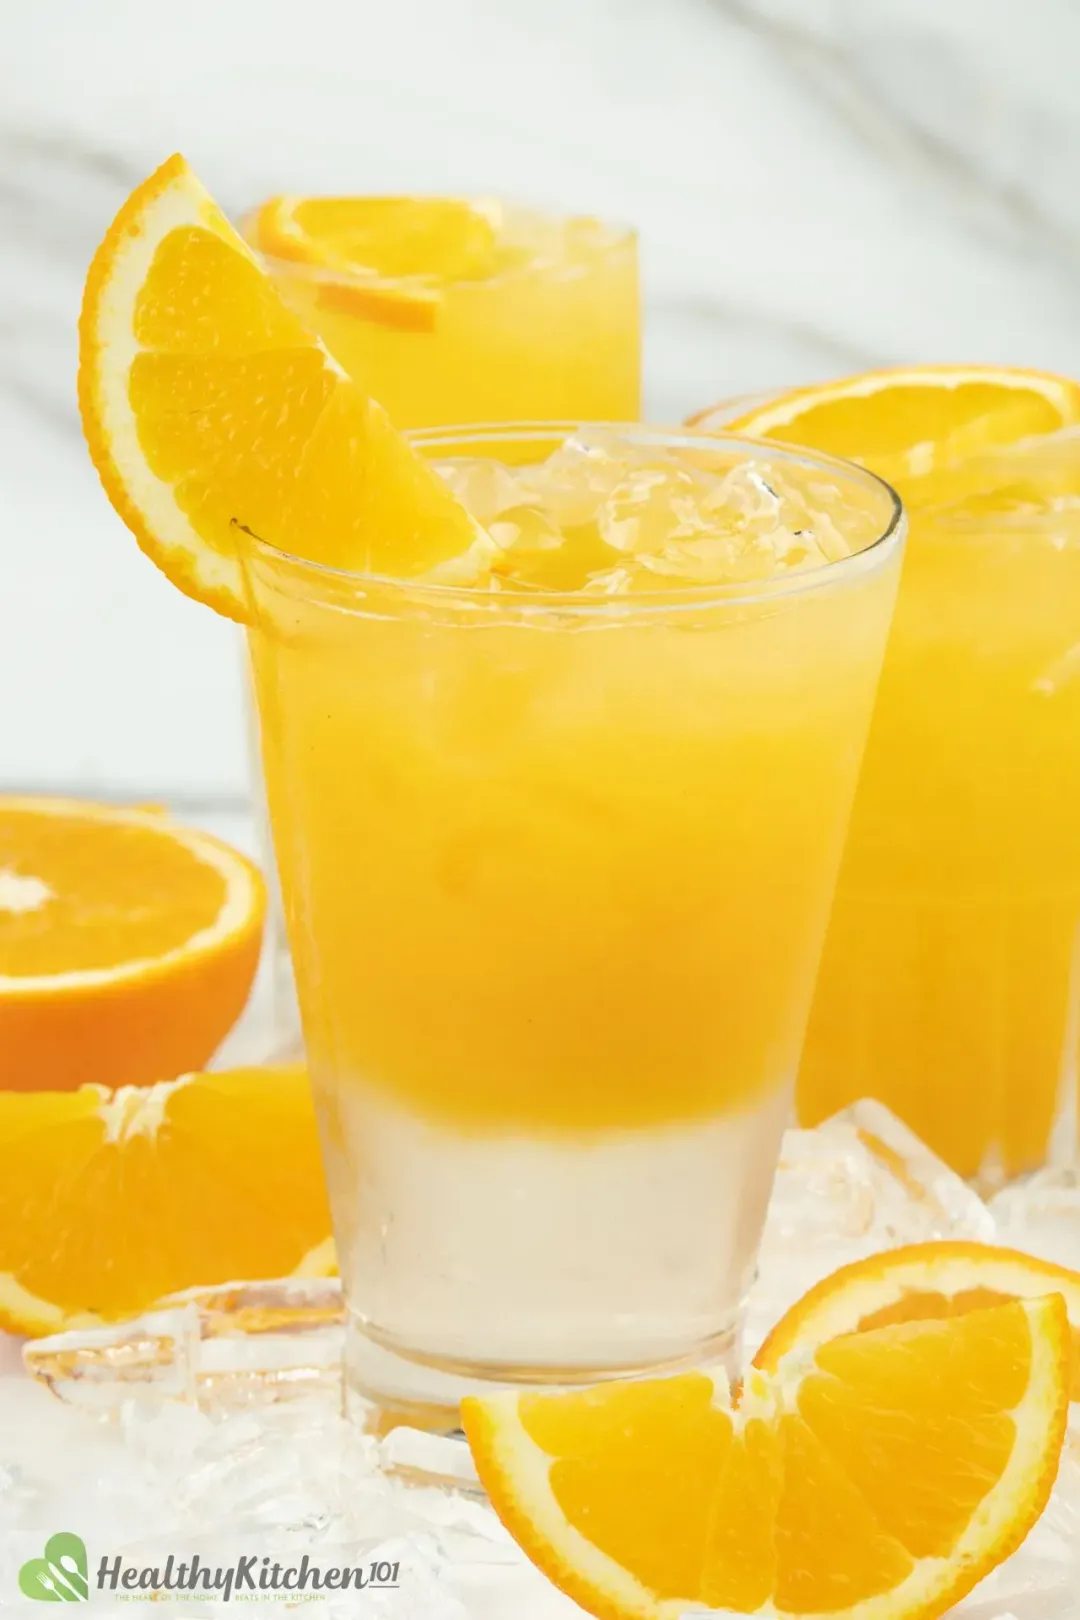 A glass of orange juice on top and sugar syrup layer at the bottom, next to orange wedges and an orange juice glass